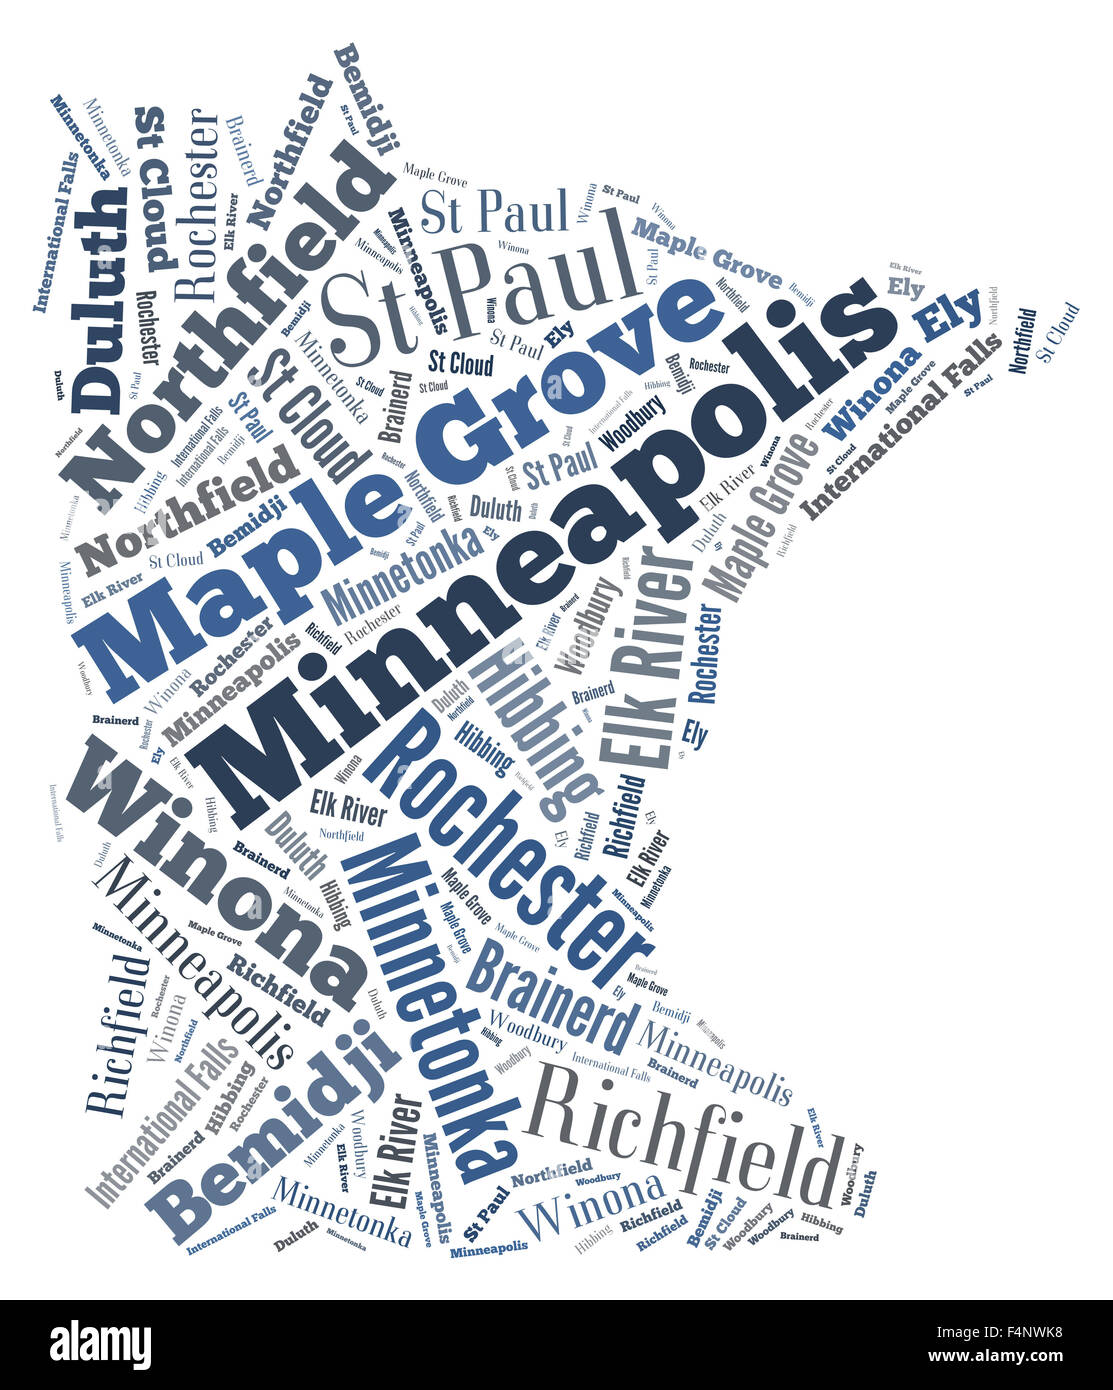 Word Cloud in the shape of Minnesota showing some of the cities in the state Stock Photo